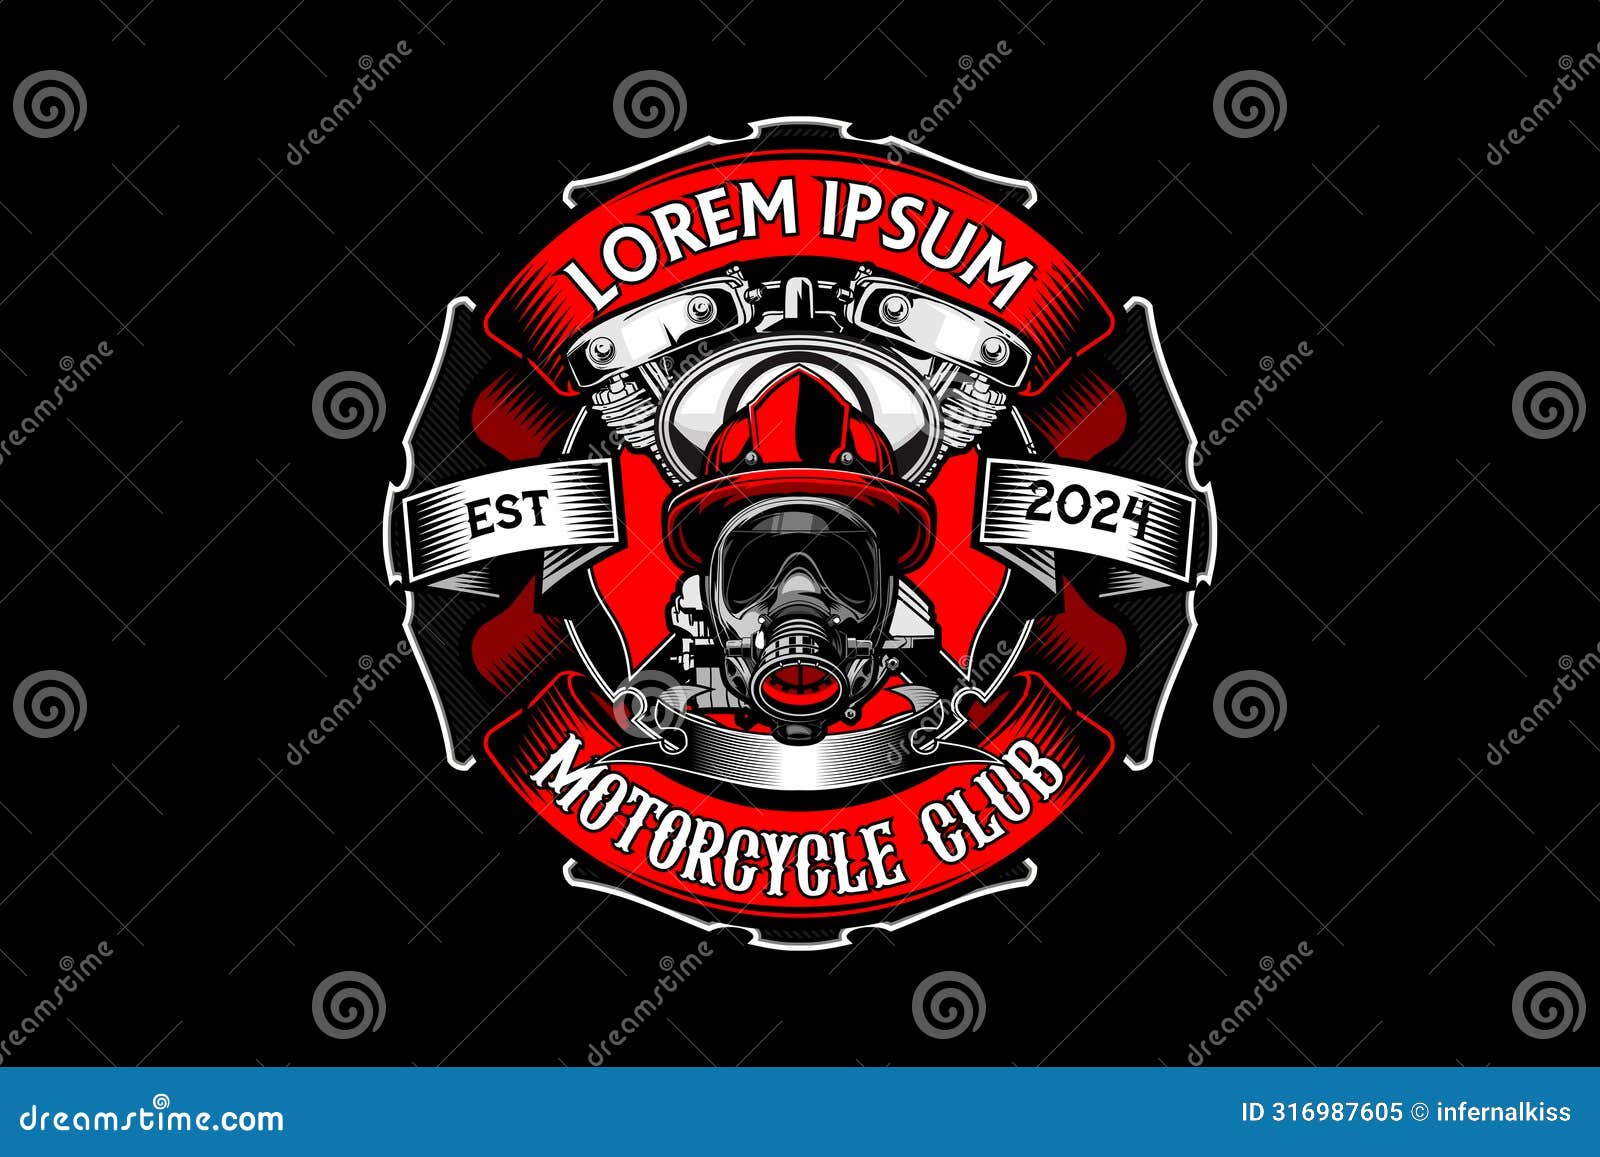 fire fighting gas mask with v-twin engine  image